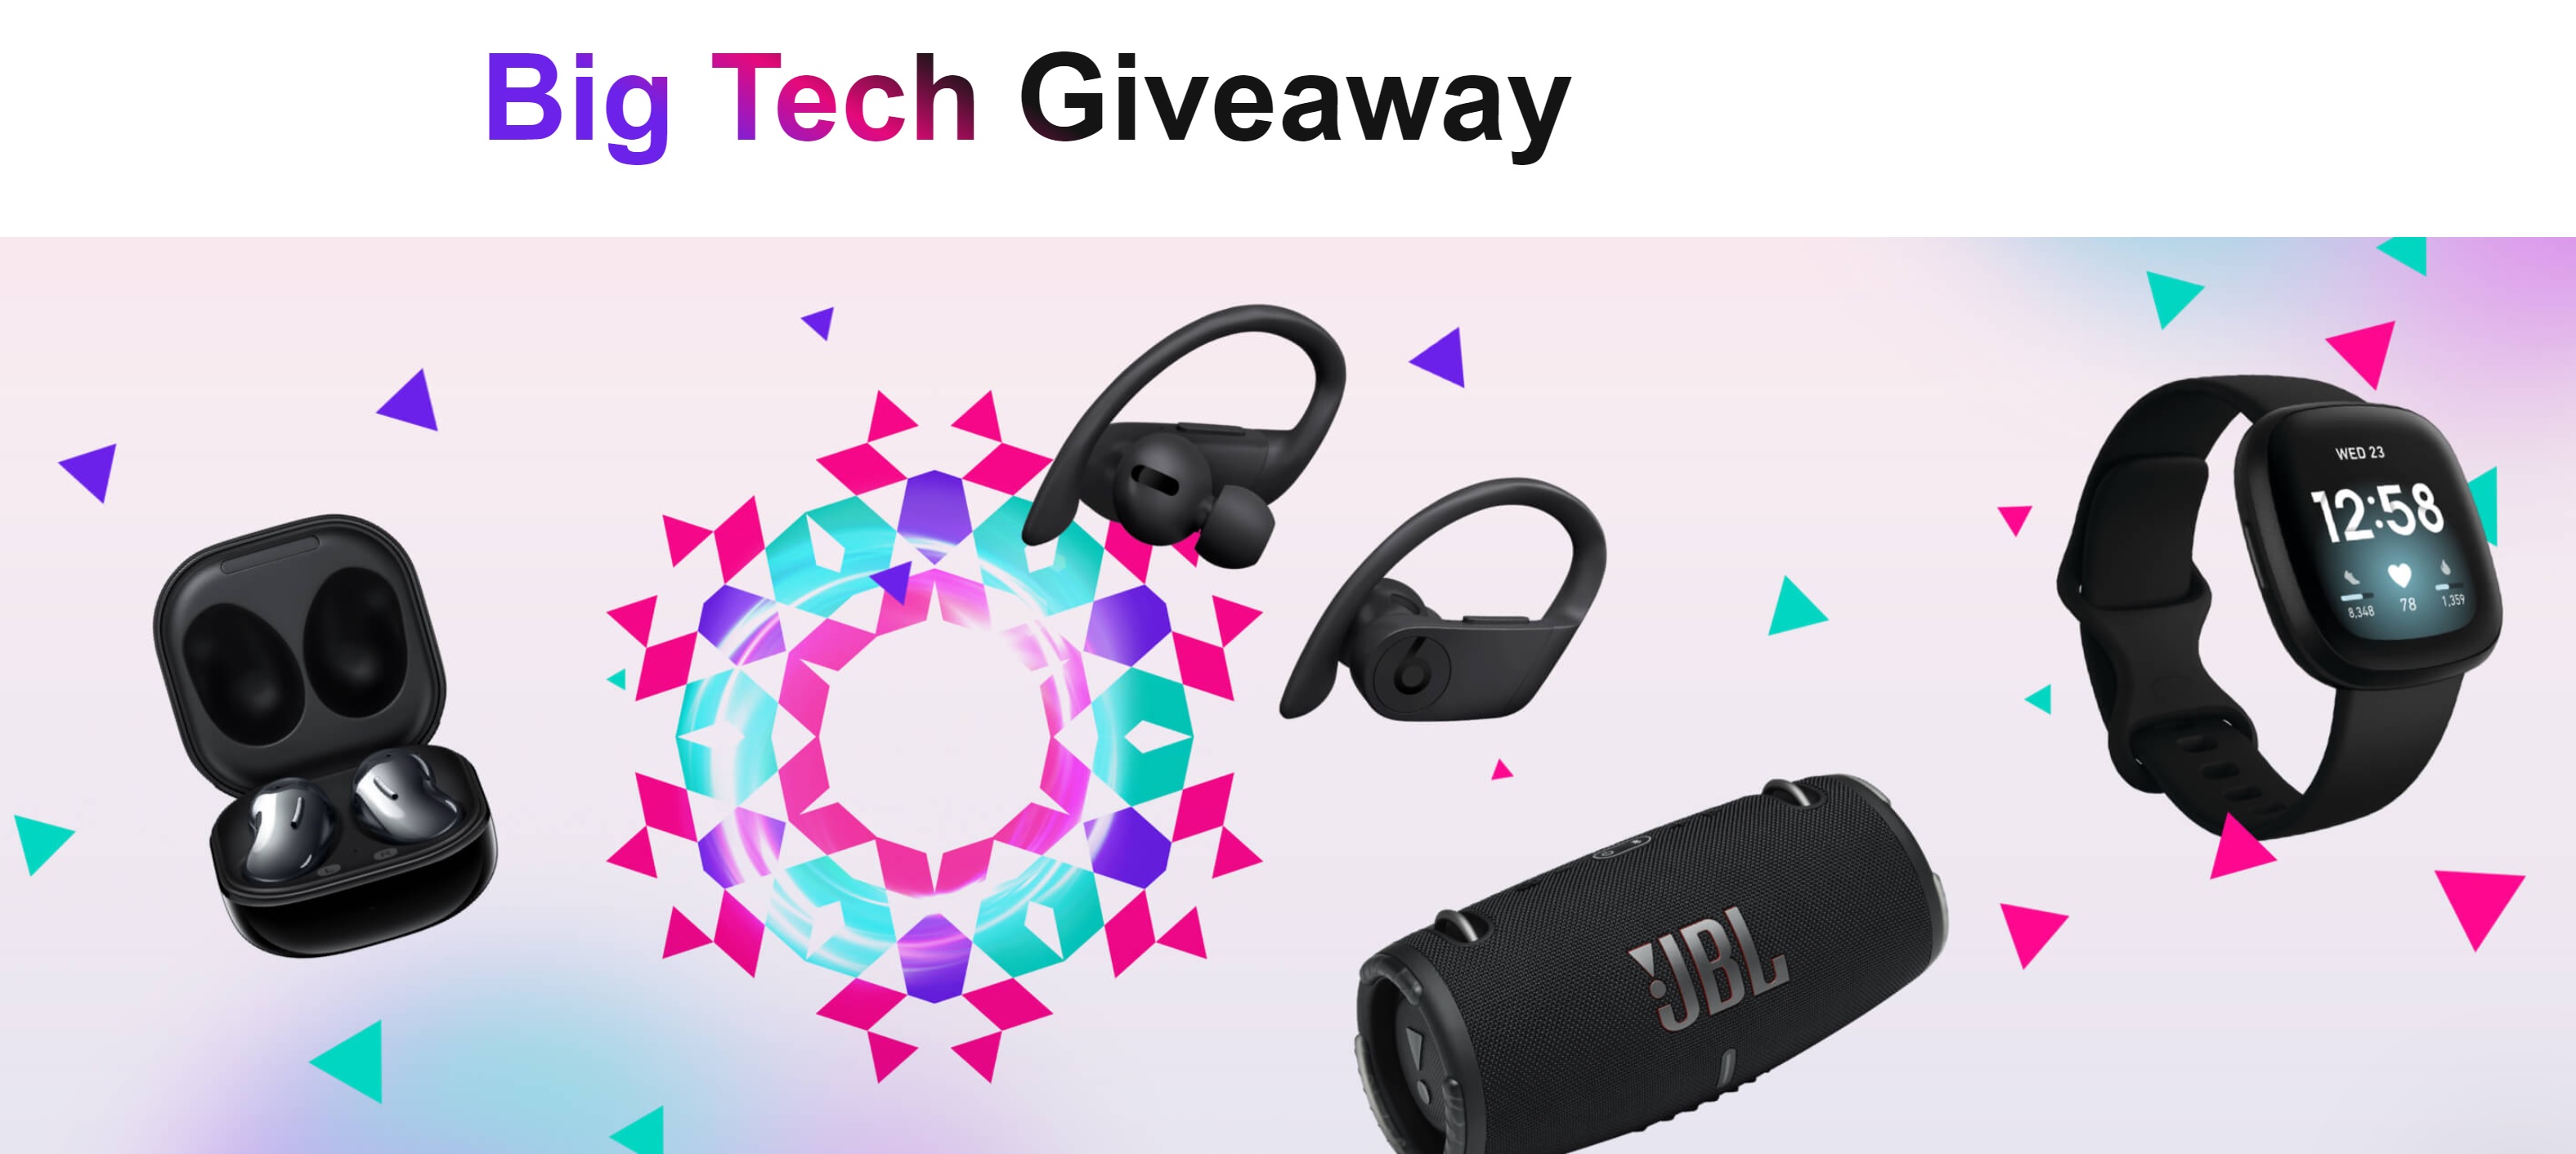 Free Gifts with Unlimited Data Deals - Choose Free Galaxy Buds Live, JBL Extreme 3, Powerbeats Pro earphones and more